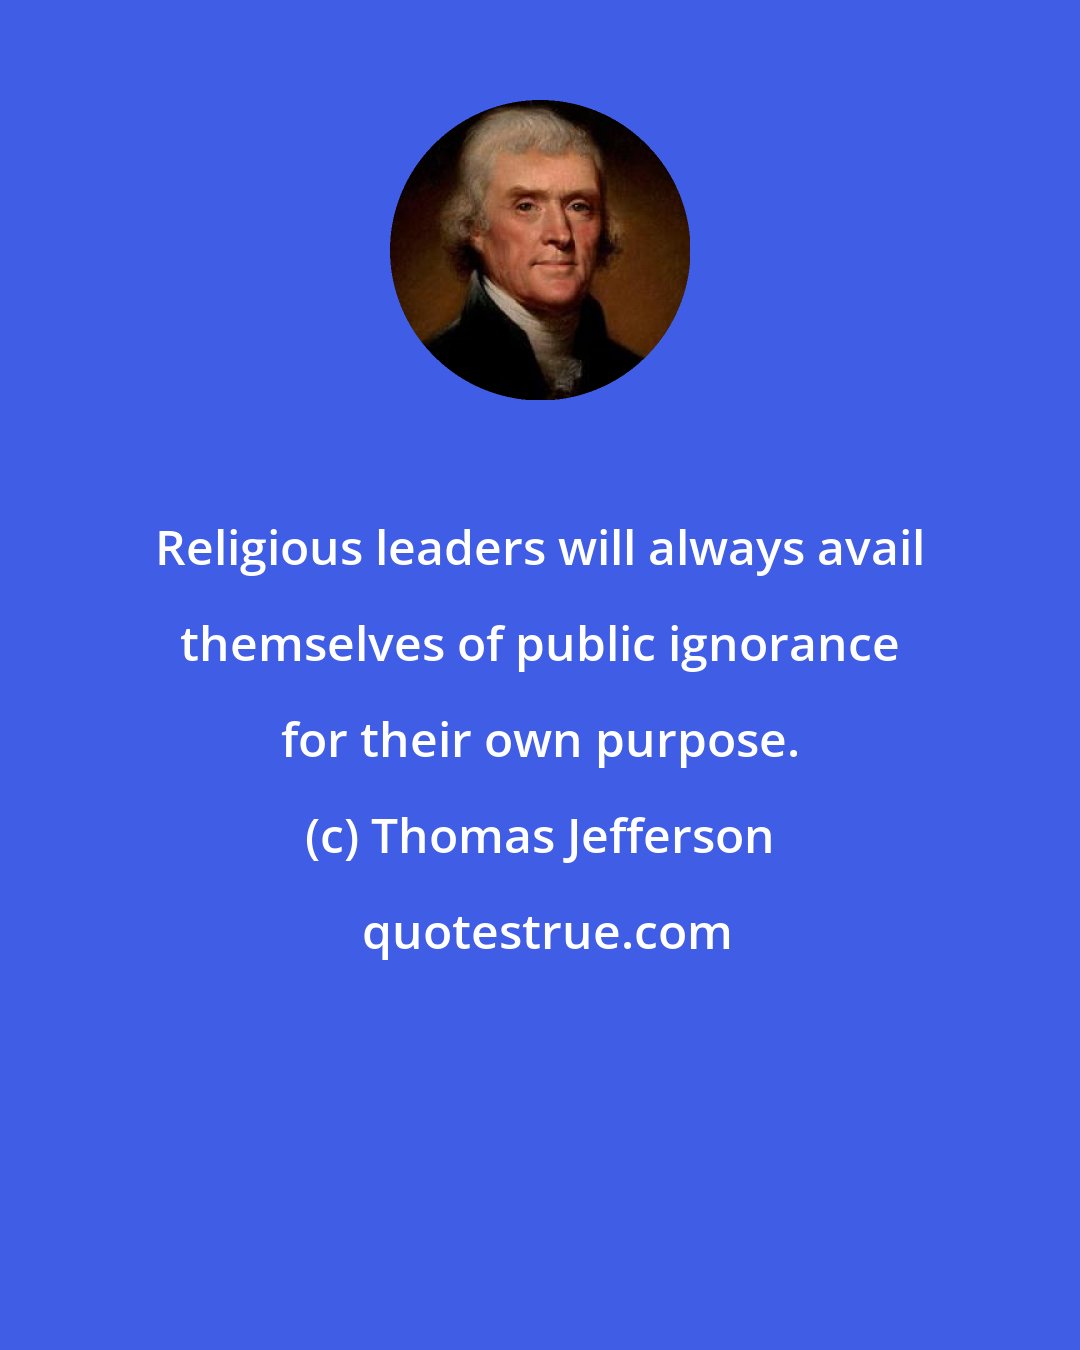 Thomas Jefferson: Religious leaders will always avail themselves of public ignorance for their own purpose.